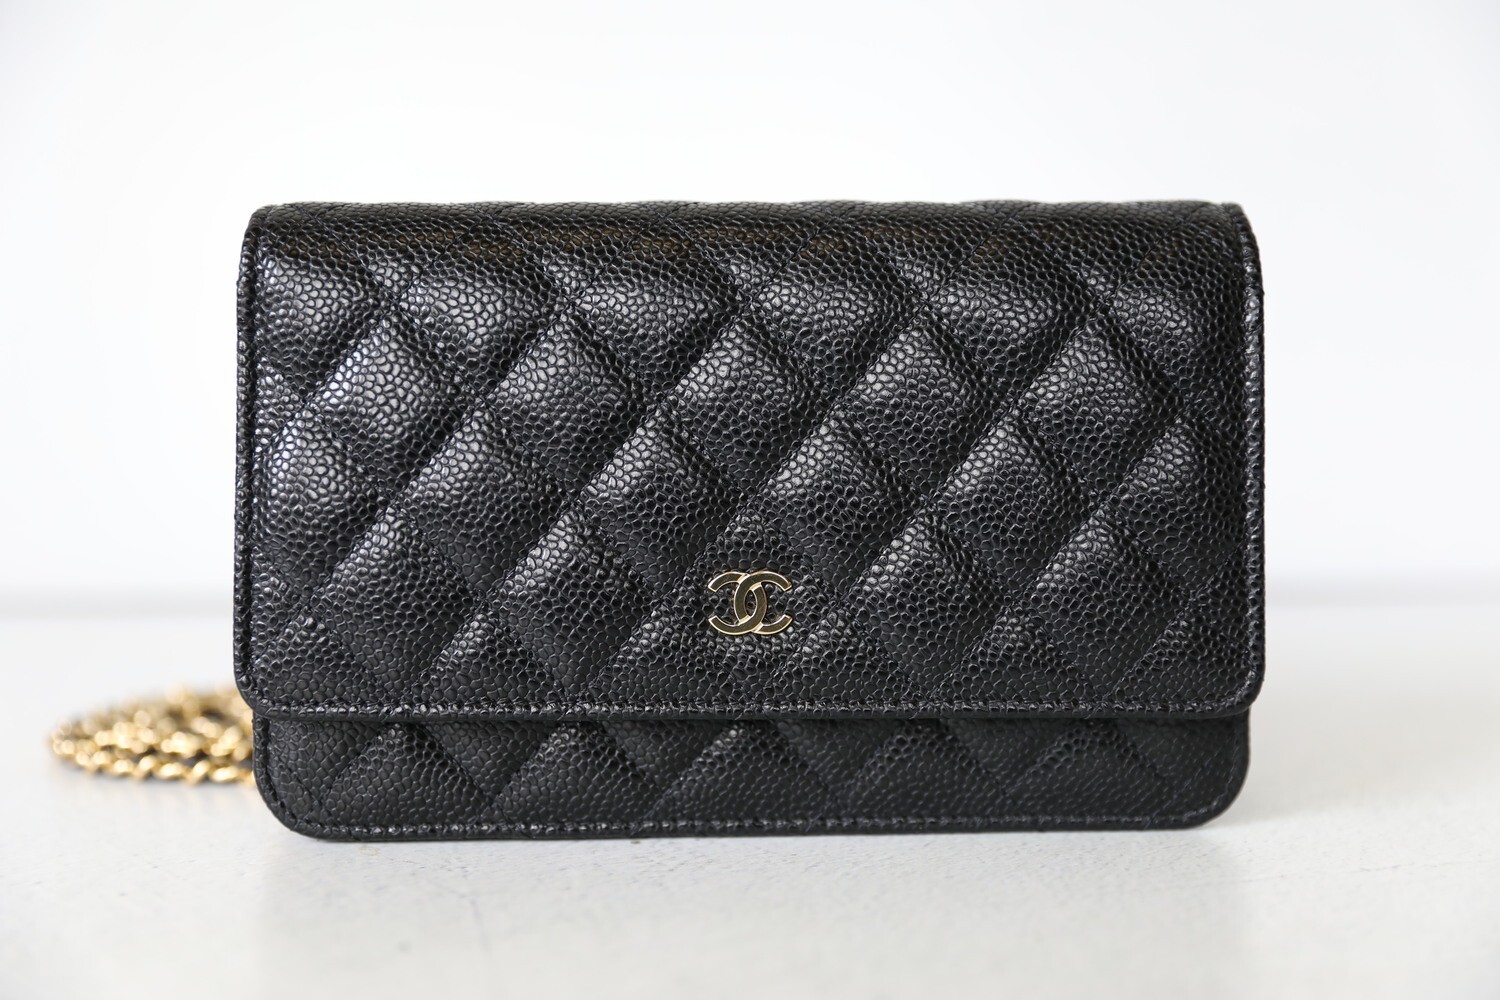 Chanel Vanity With Chain Small, Black Caviar with Gold Hardware, New in Box  WA001